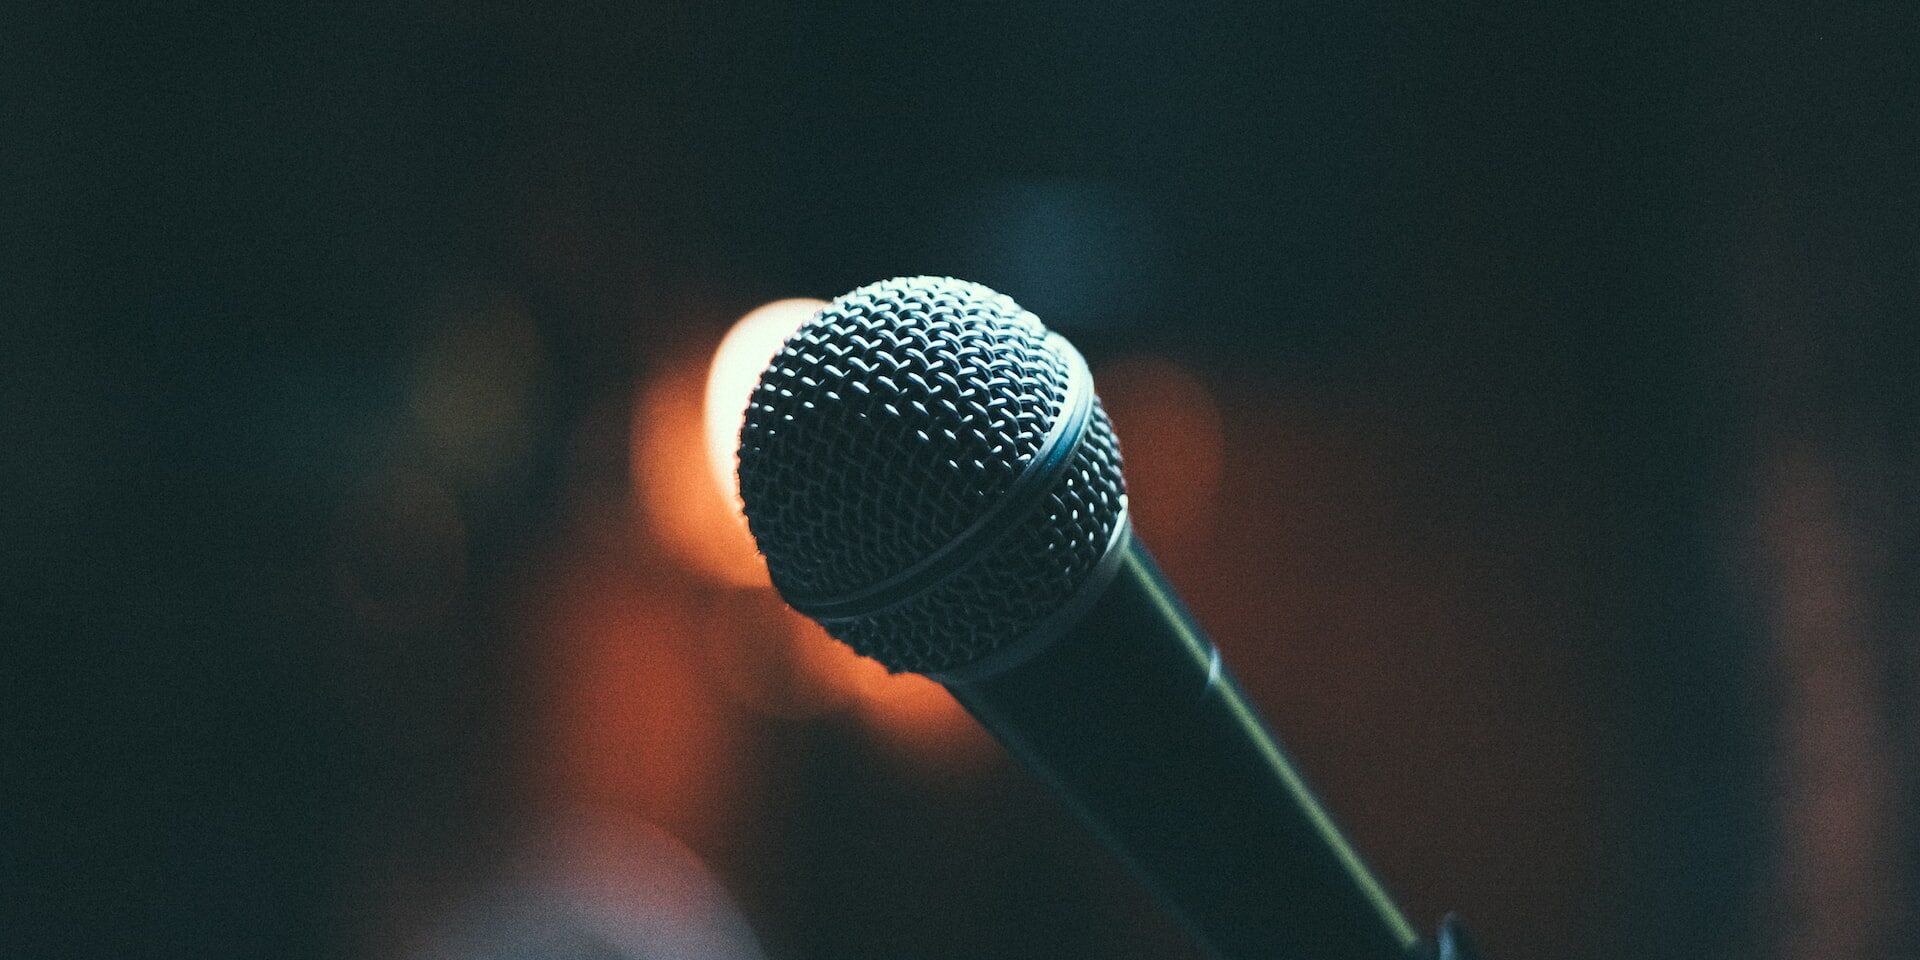 Messenger Healthcare Marketing | Healthcare Marketing Done Right: A Microphone, Not a Megaphone